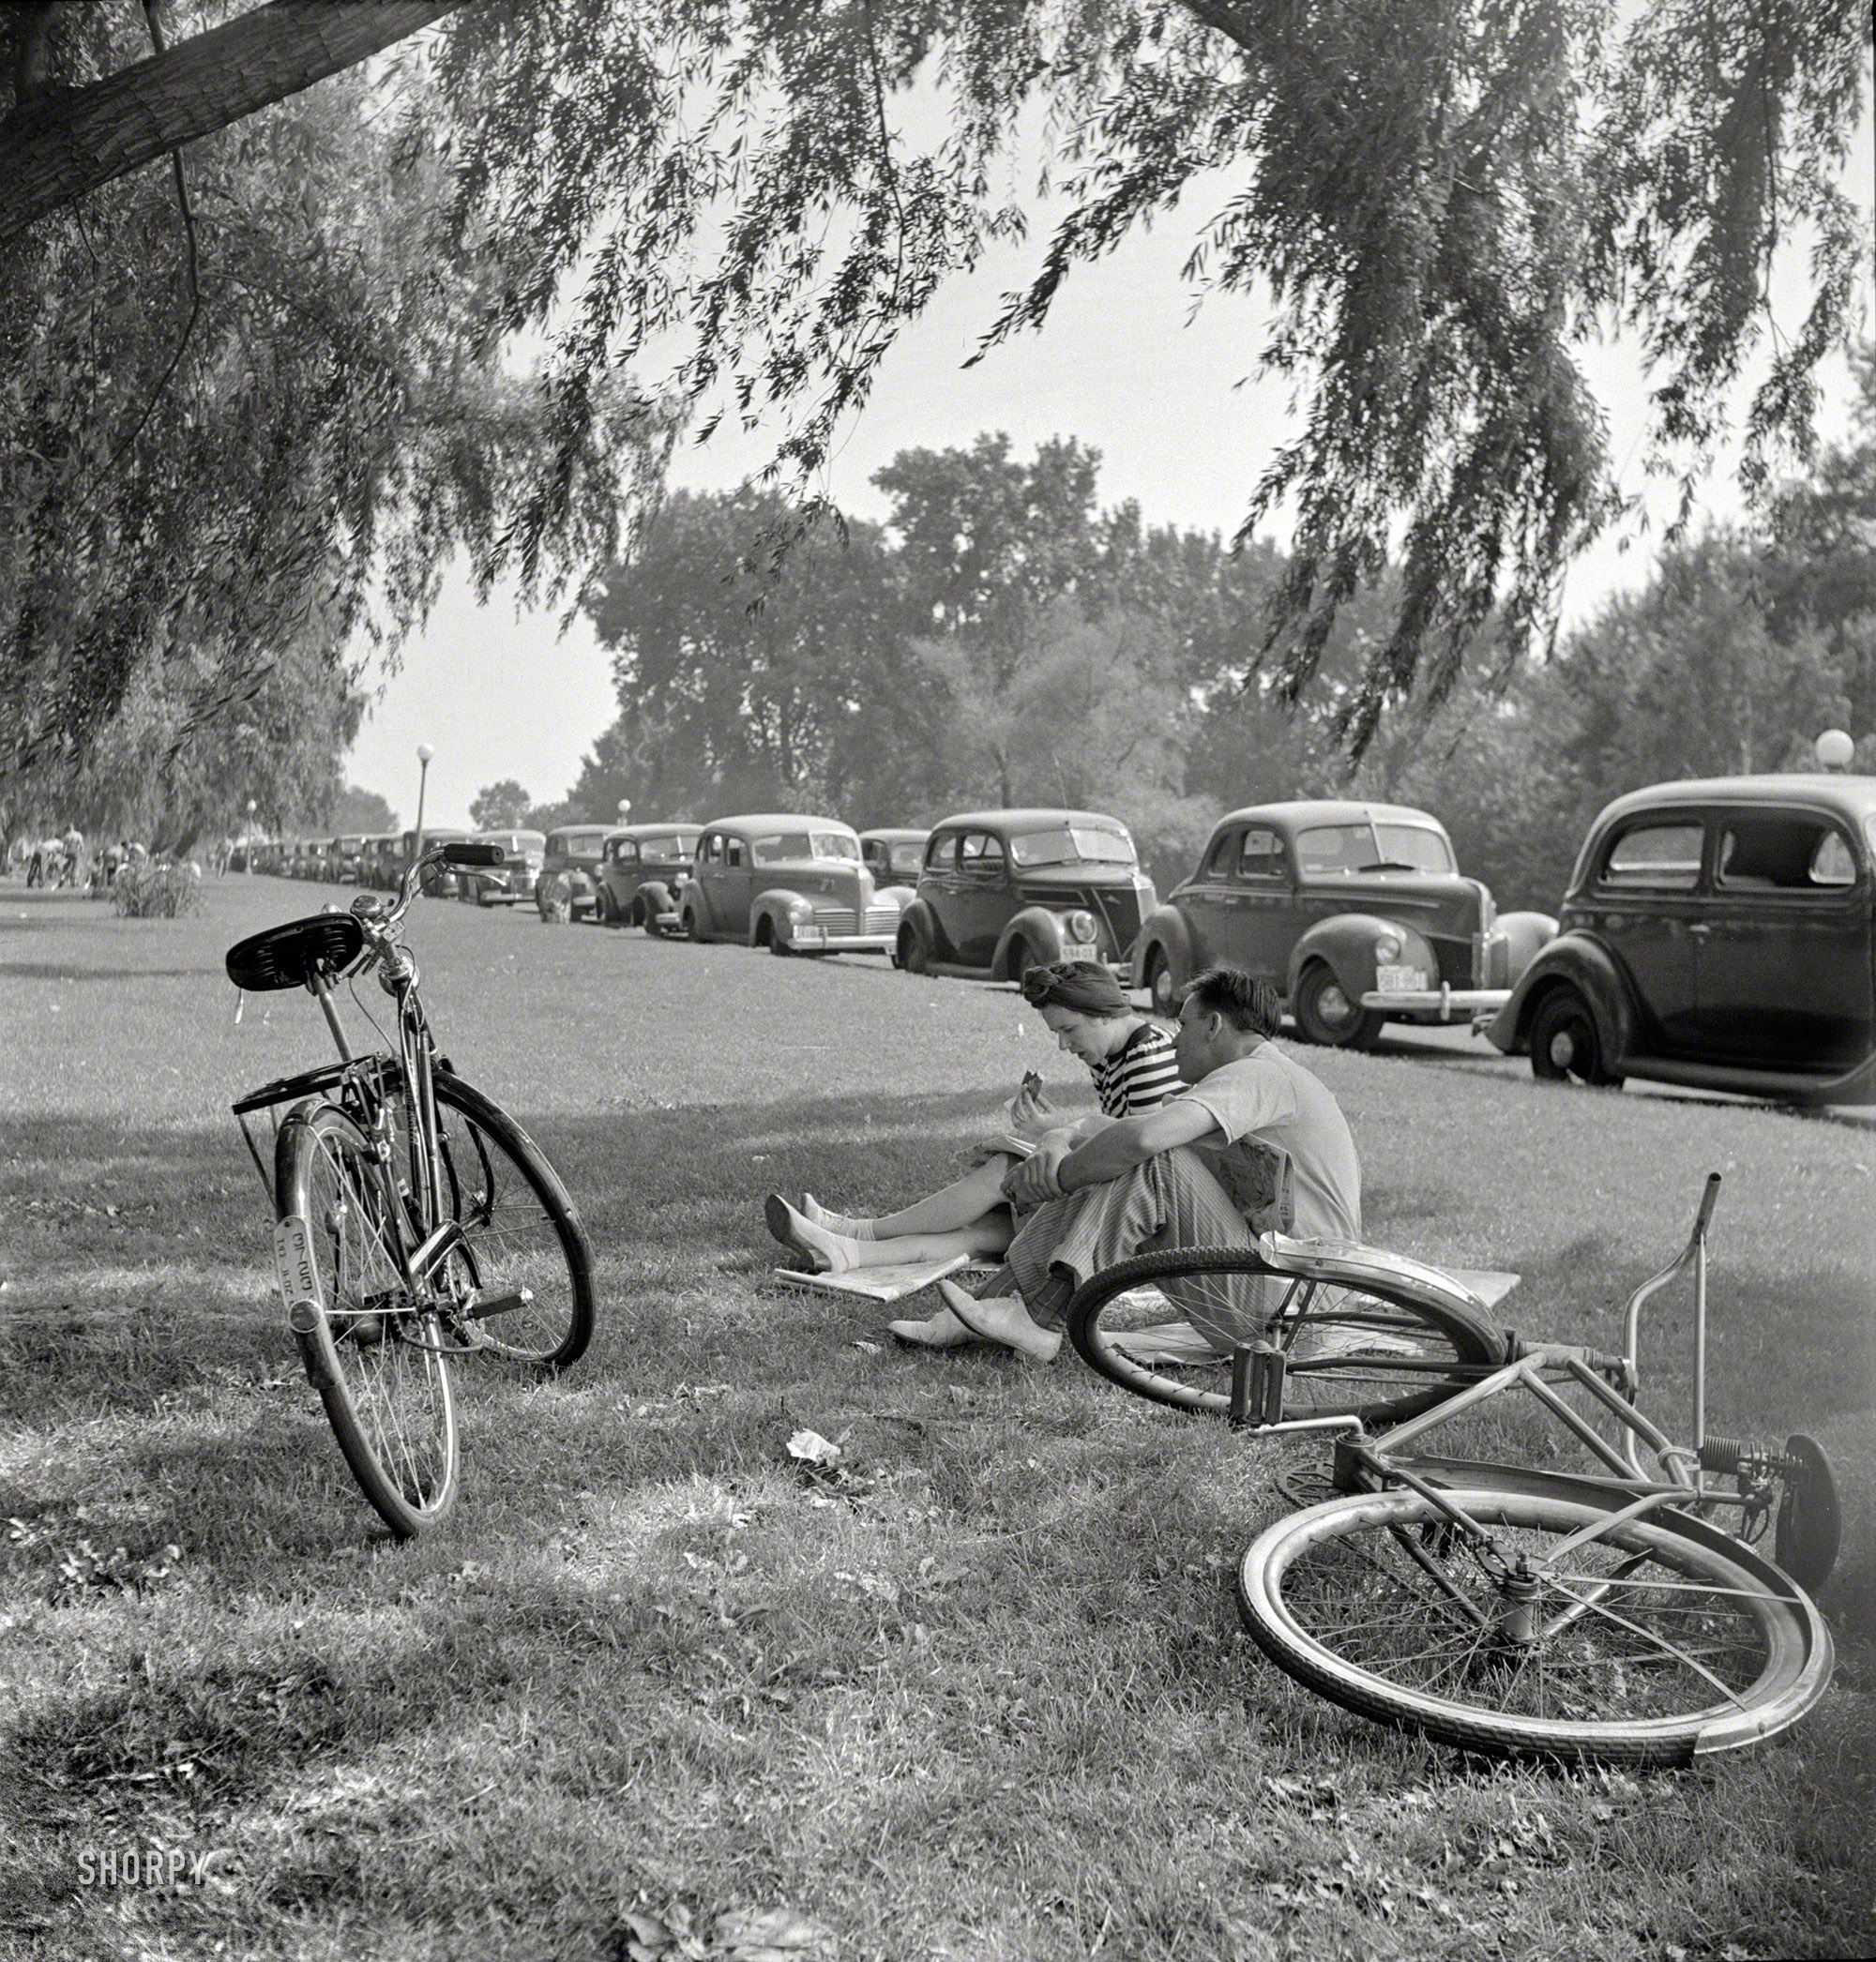 July 1942. "Sunday loungers at Hains Point." Peaceful wartime Washington. Photo by Marjory Collins for the Office of War Information. View full size.